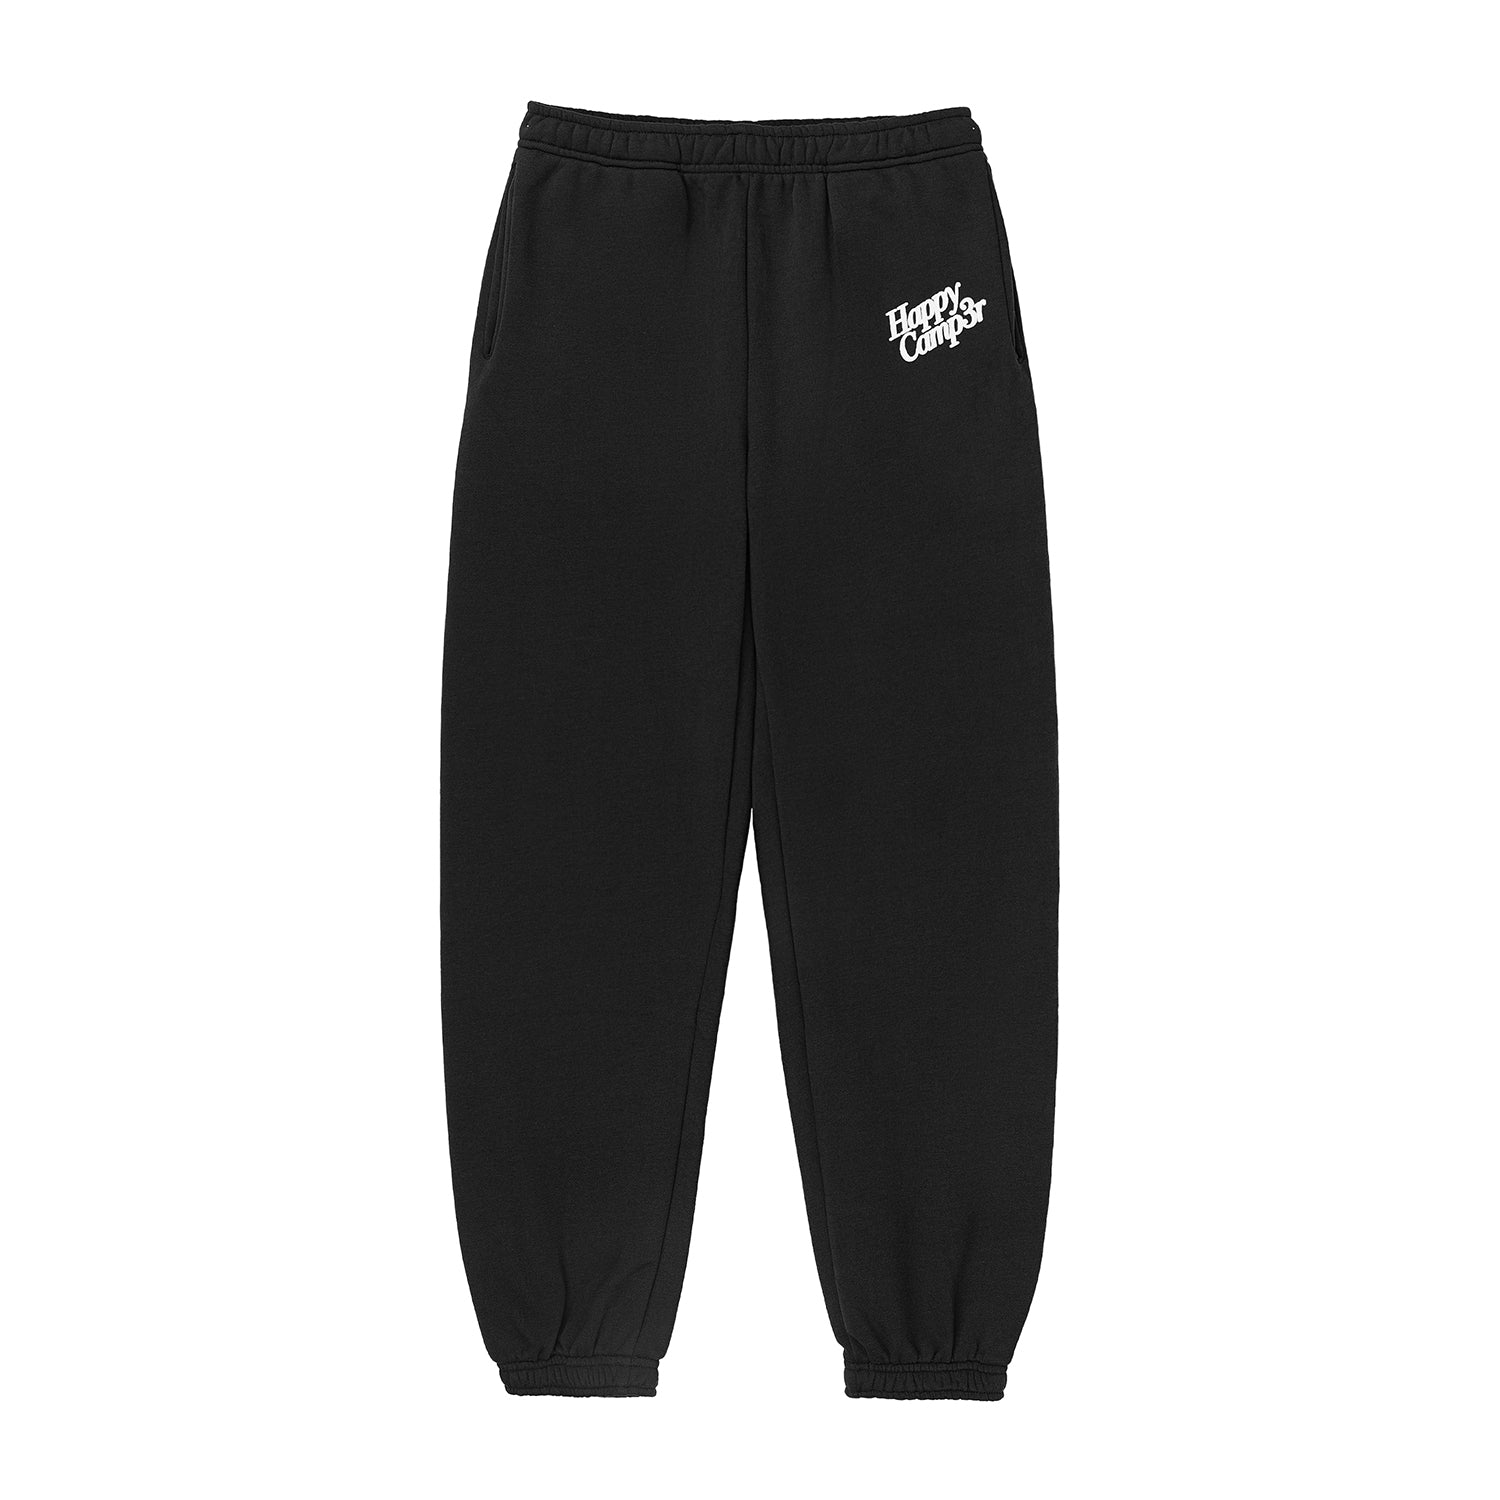 I'll Always Love You Sweatpants - Charcoal Gray – The Happy Camp3r